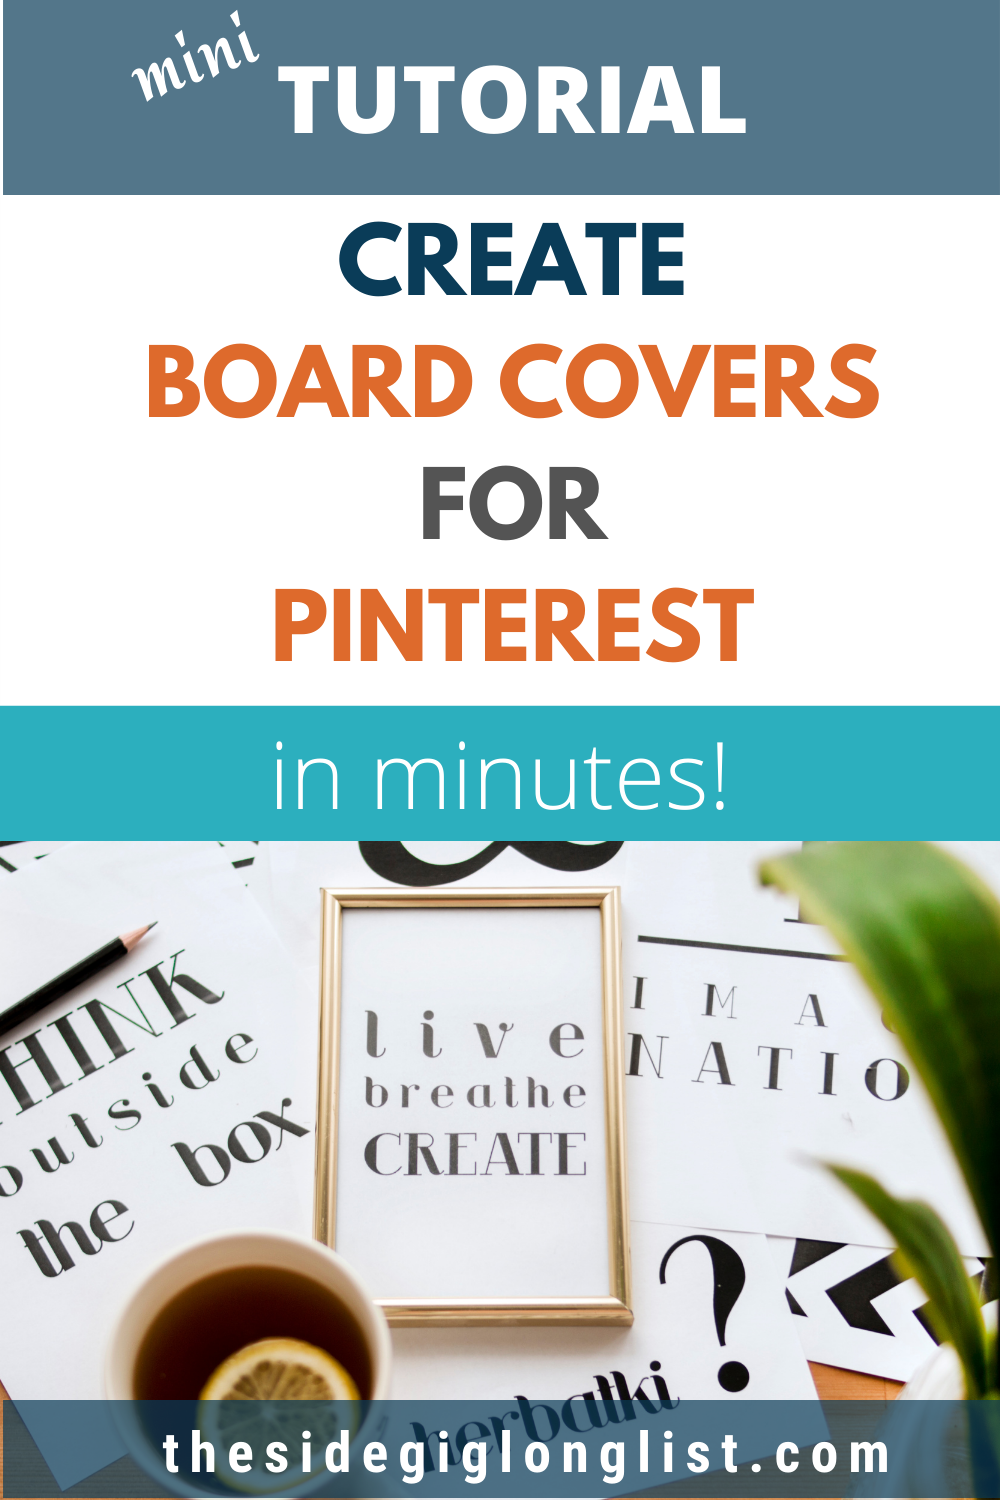 create board covers for Pinterest in minutes